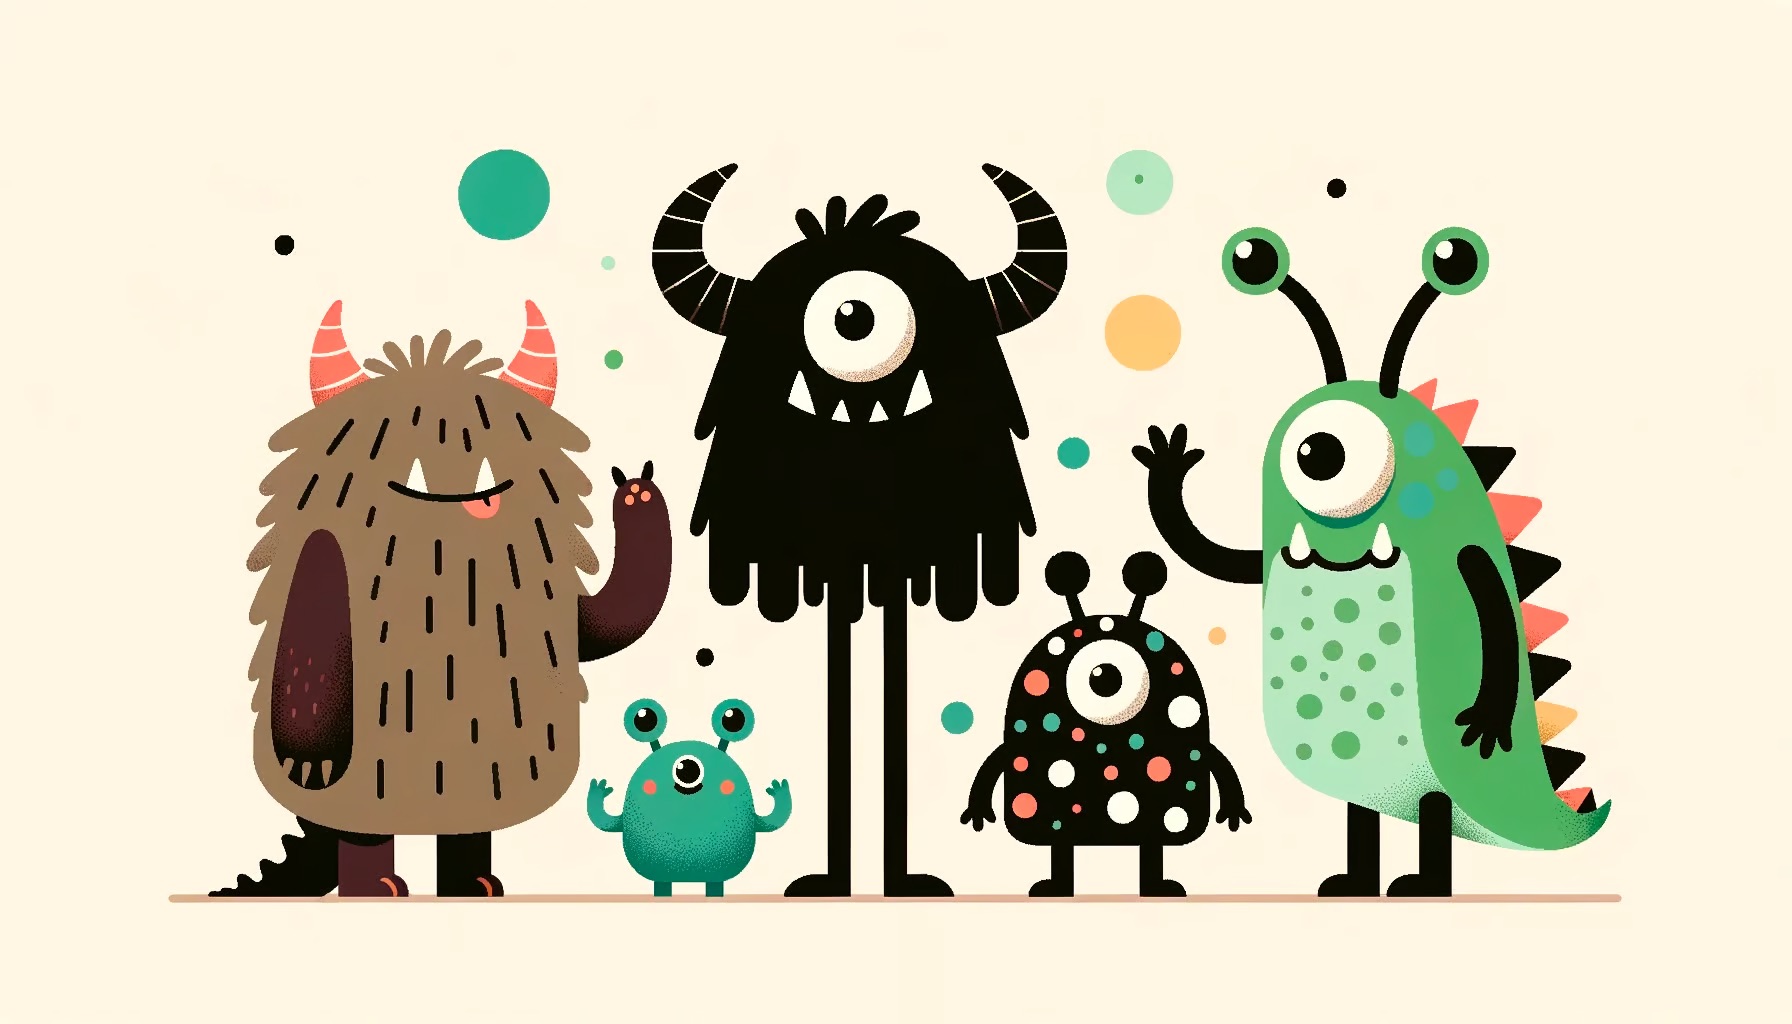 Dall-e 3: Illustration in various styles of a diverse family of monsters. The group includes a furry brown monster, a sleek black monster with antennas, a spotted green monster, and a tiny polka-dotted monster, all interacting in a playful environment.